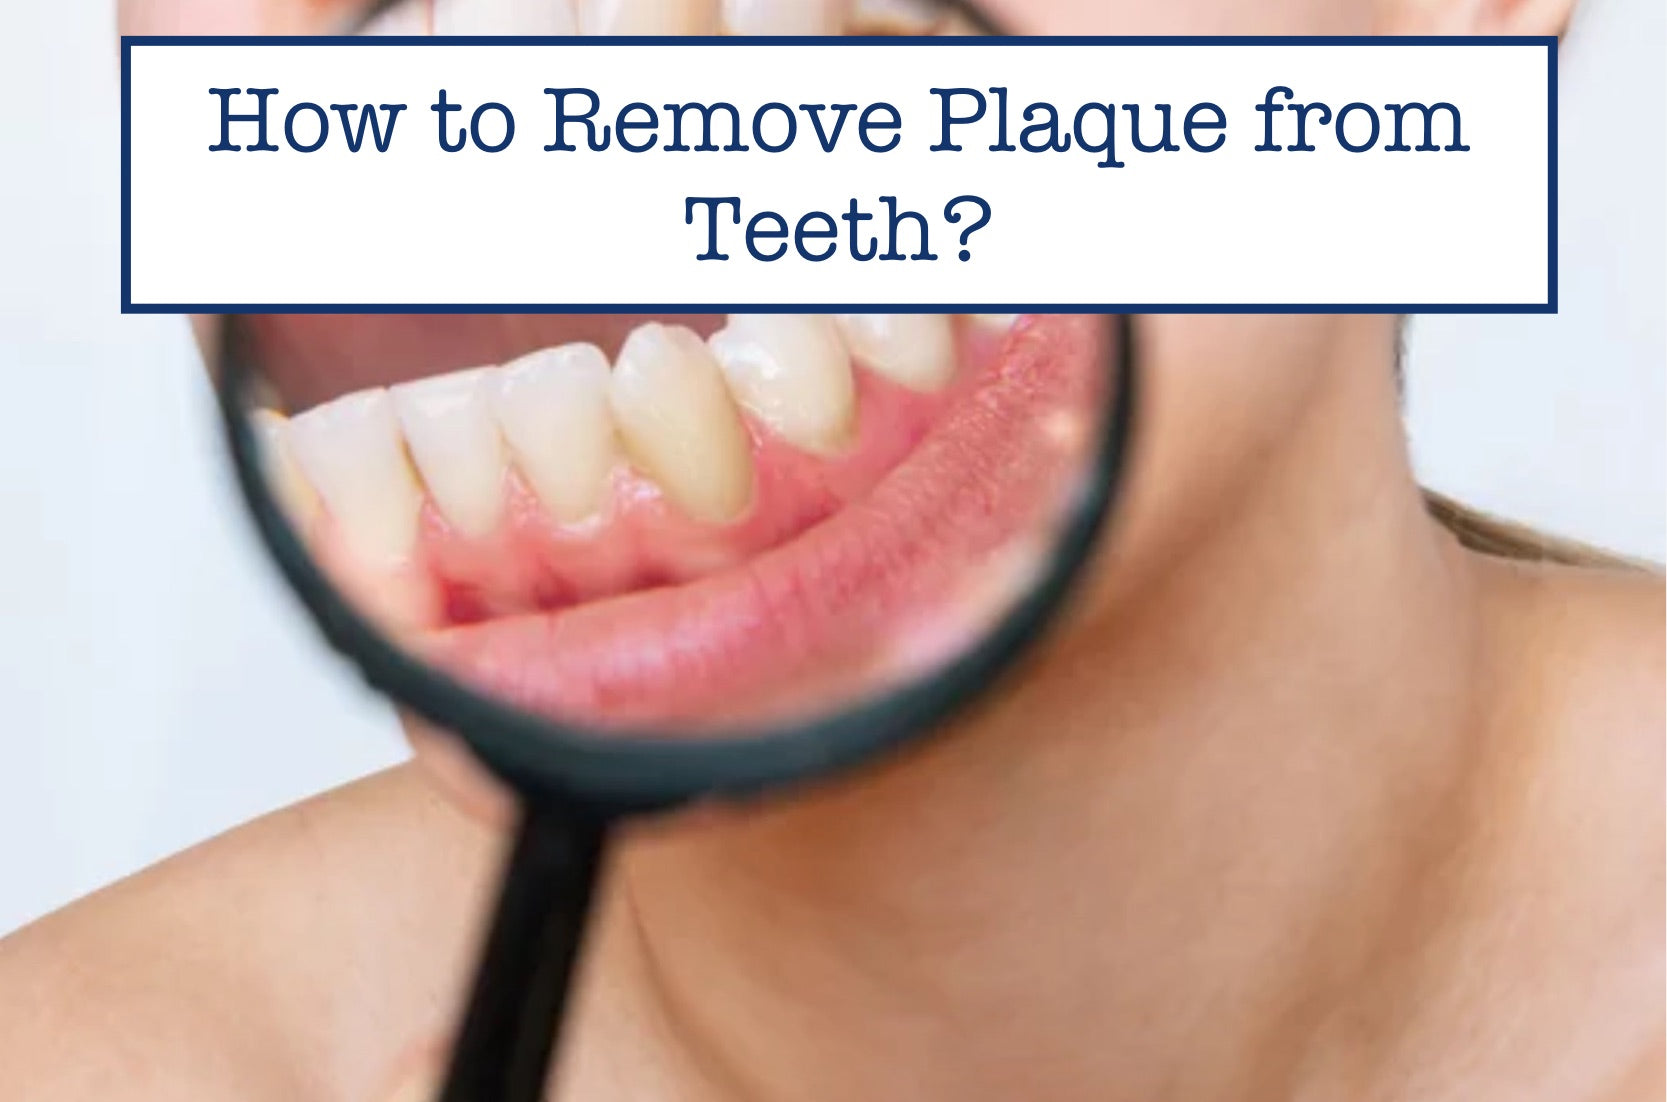 How to Remove Plaque from Teeth?